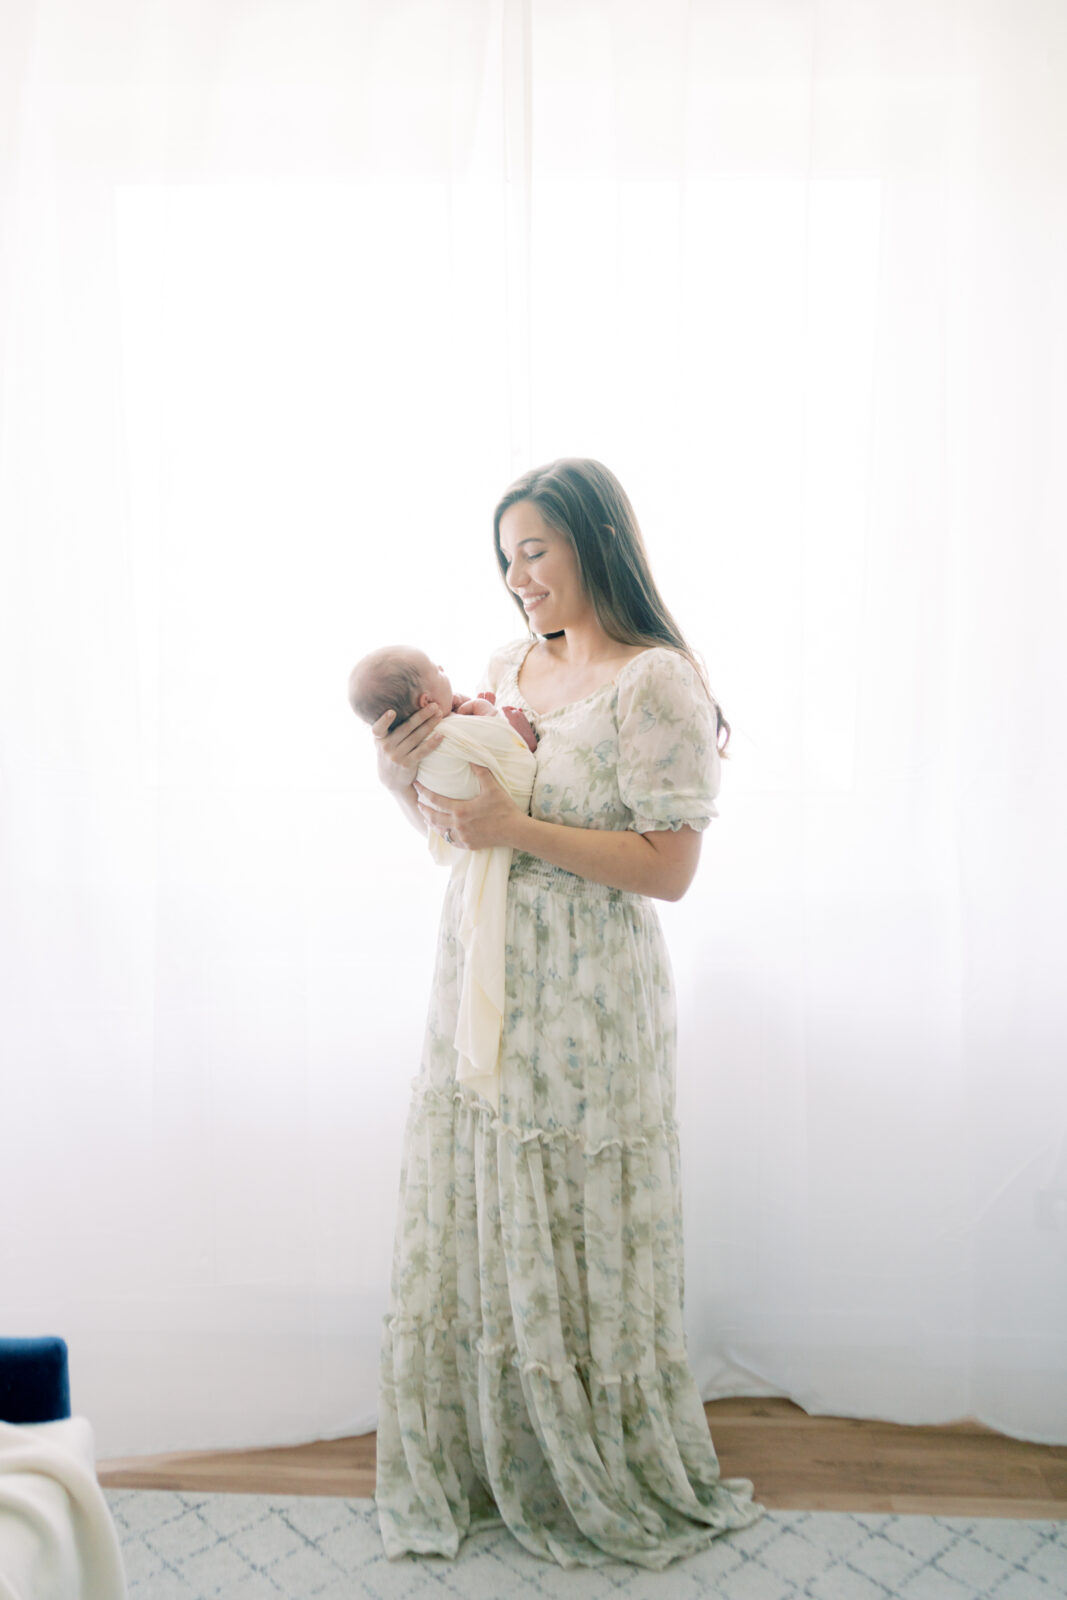 Backlit photo of mother in a flowy dress holding her newborn baby boy and looking down at him while singing to him by Lawton Ok photographer Courtney Cronin